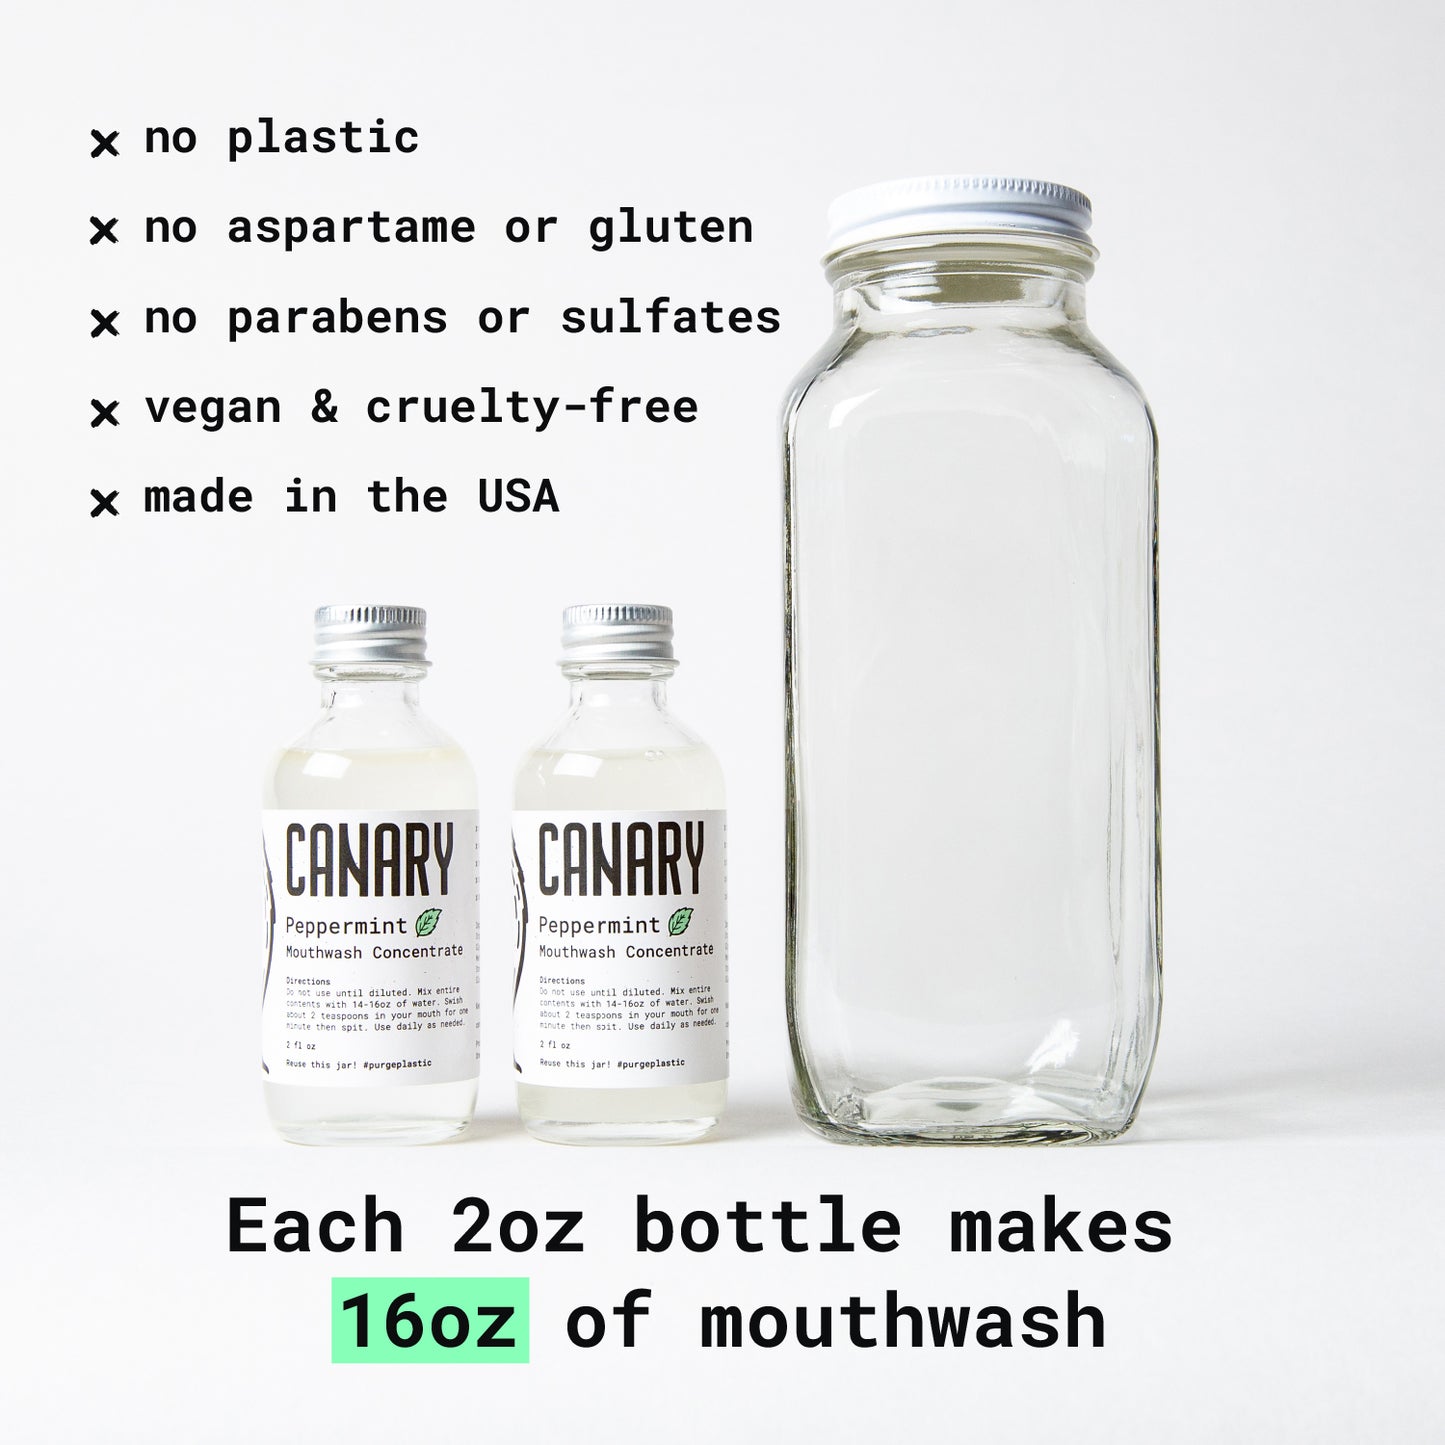 Canary Peppermint Mouthwash Starter Kit including 2 of the 2 ounce concentrate bottles and one reusable glass mixing bottle